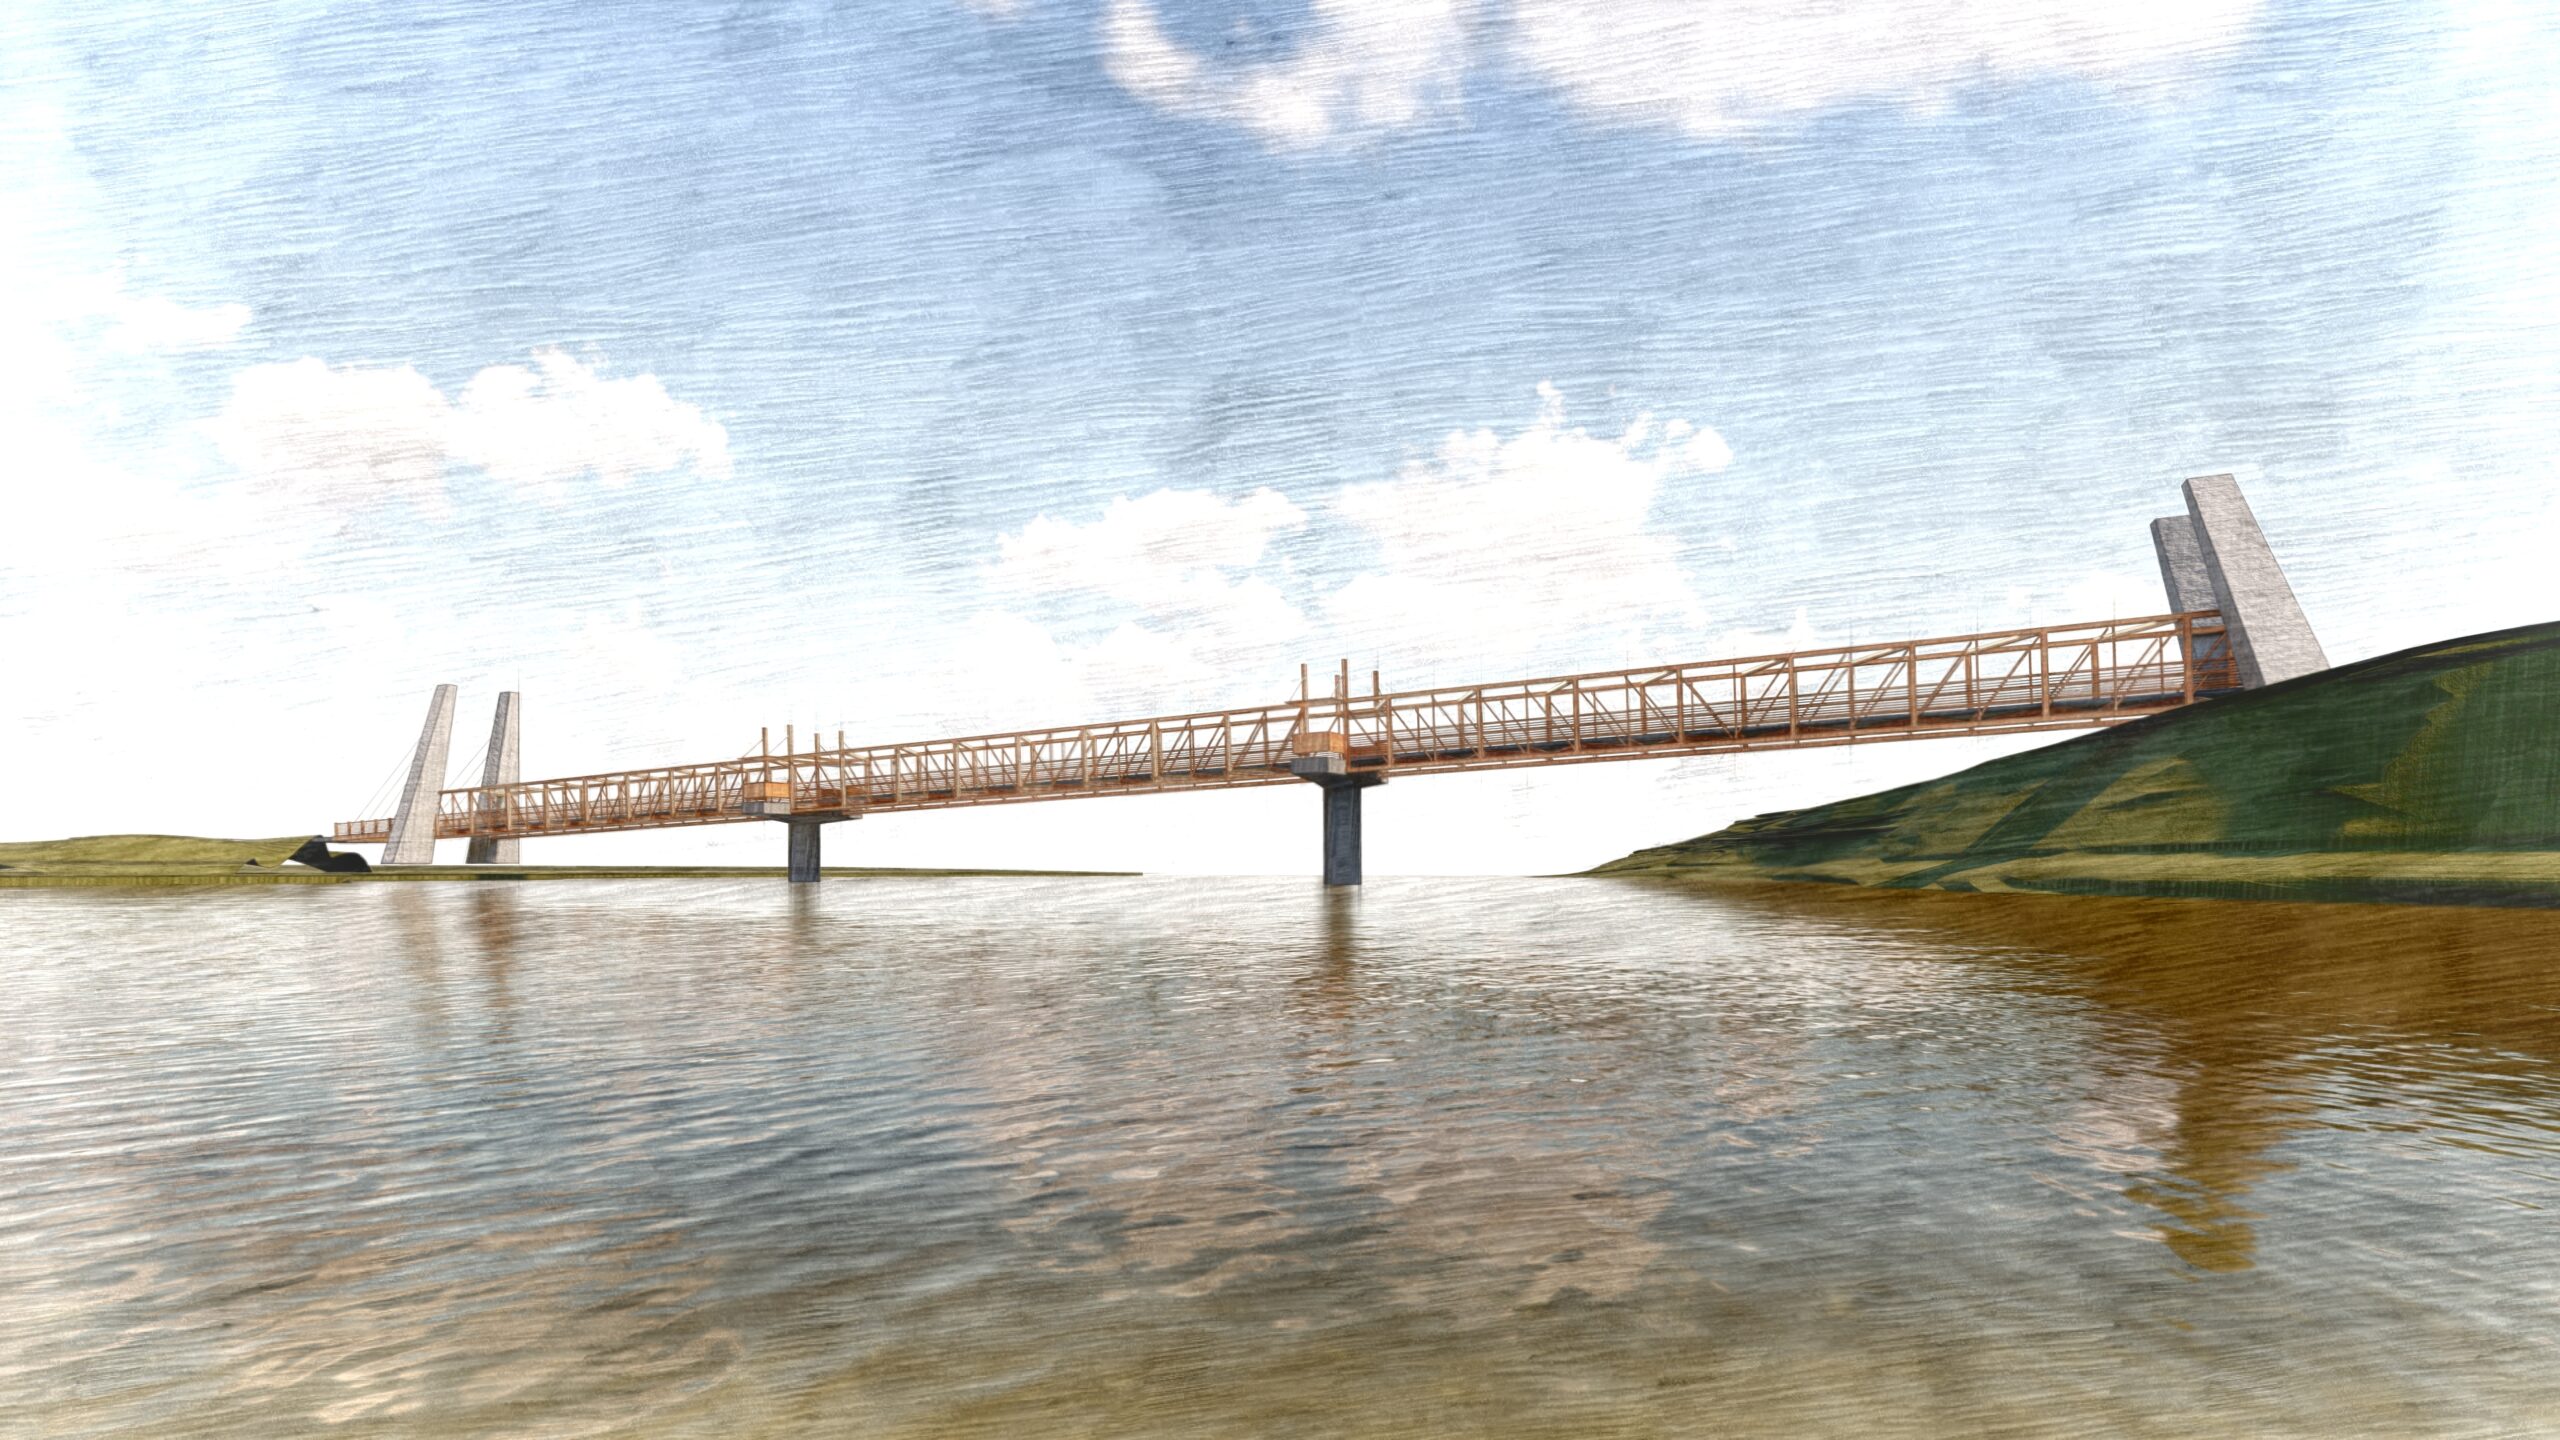 Rendered view of a bridge crossing a creek during the day with concrete pillars on either side.